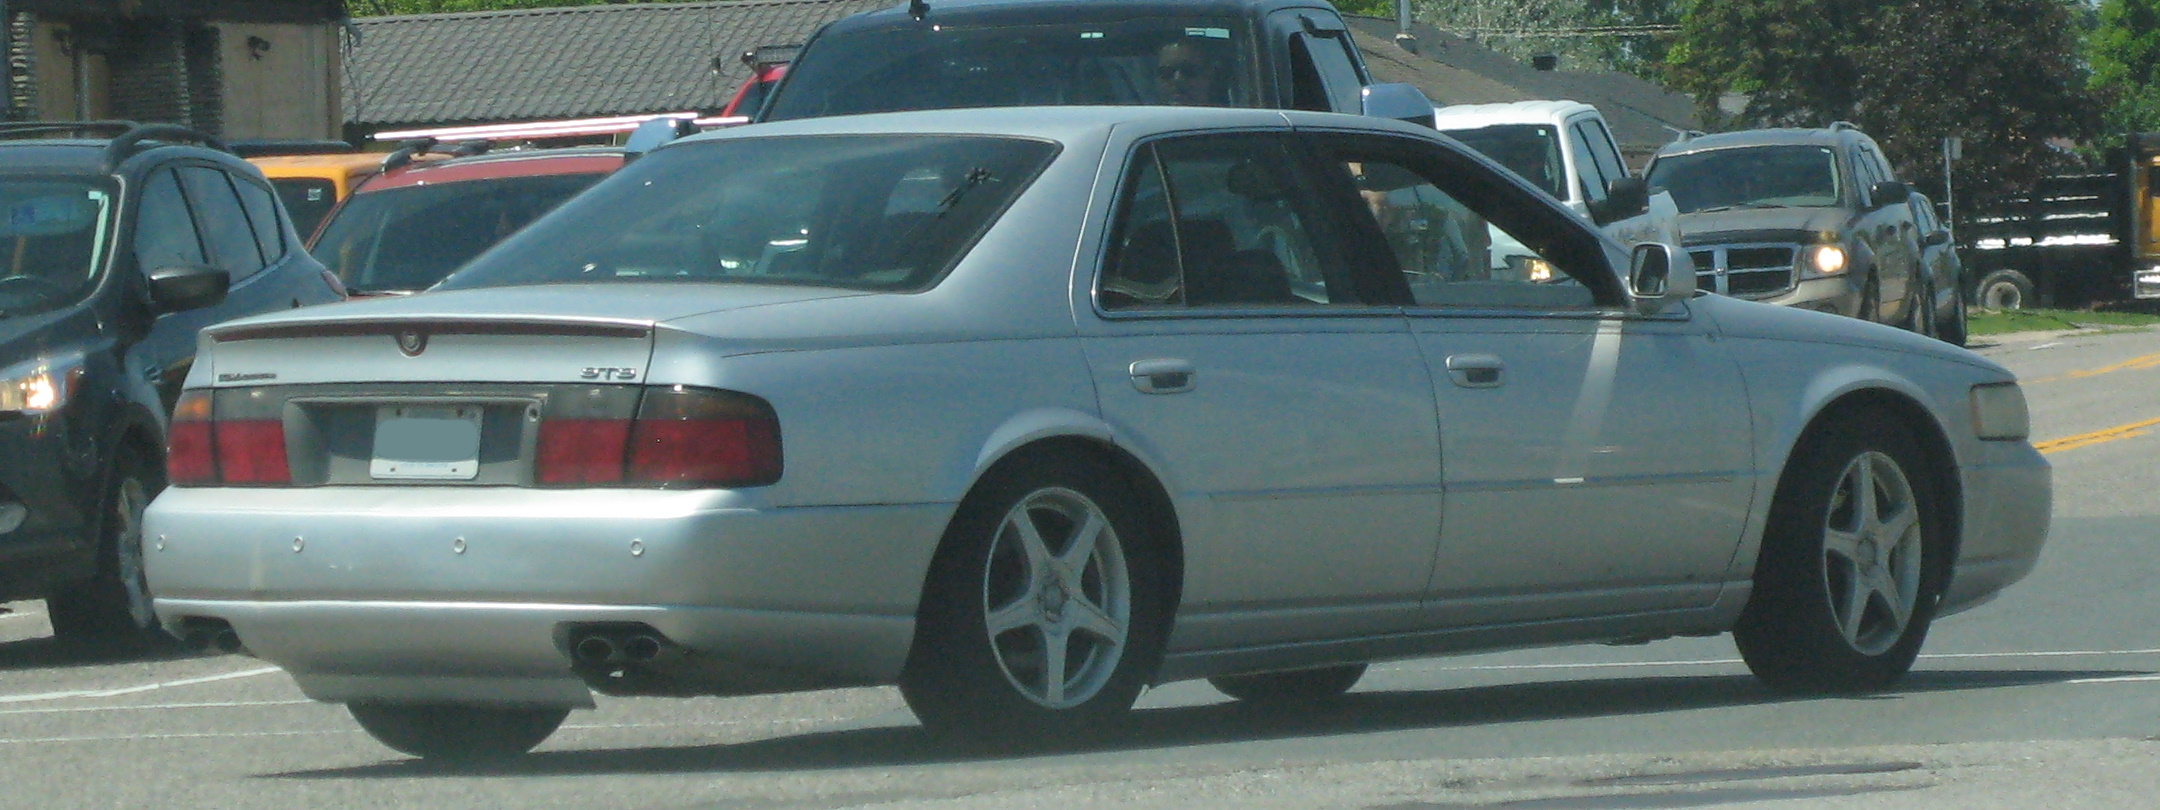 File:2003 Cadillac Seville STS, Rear Right, 06-30-2020.jpg - Wikimedia  Commons